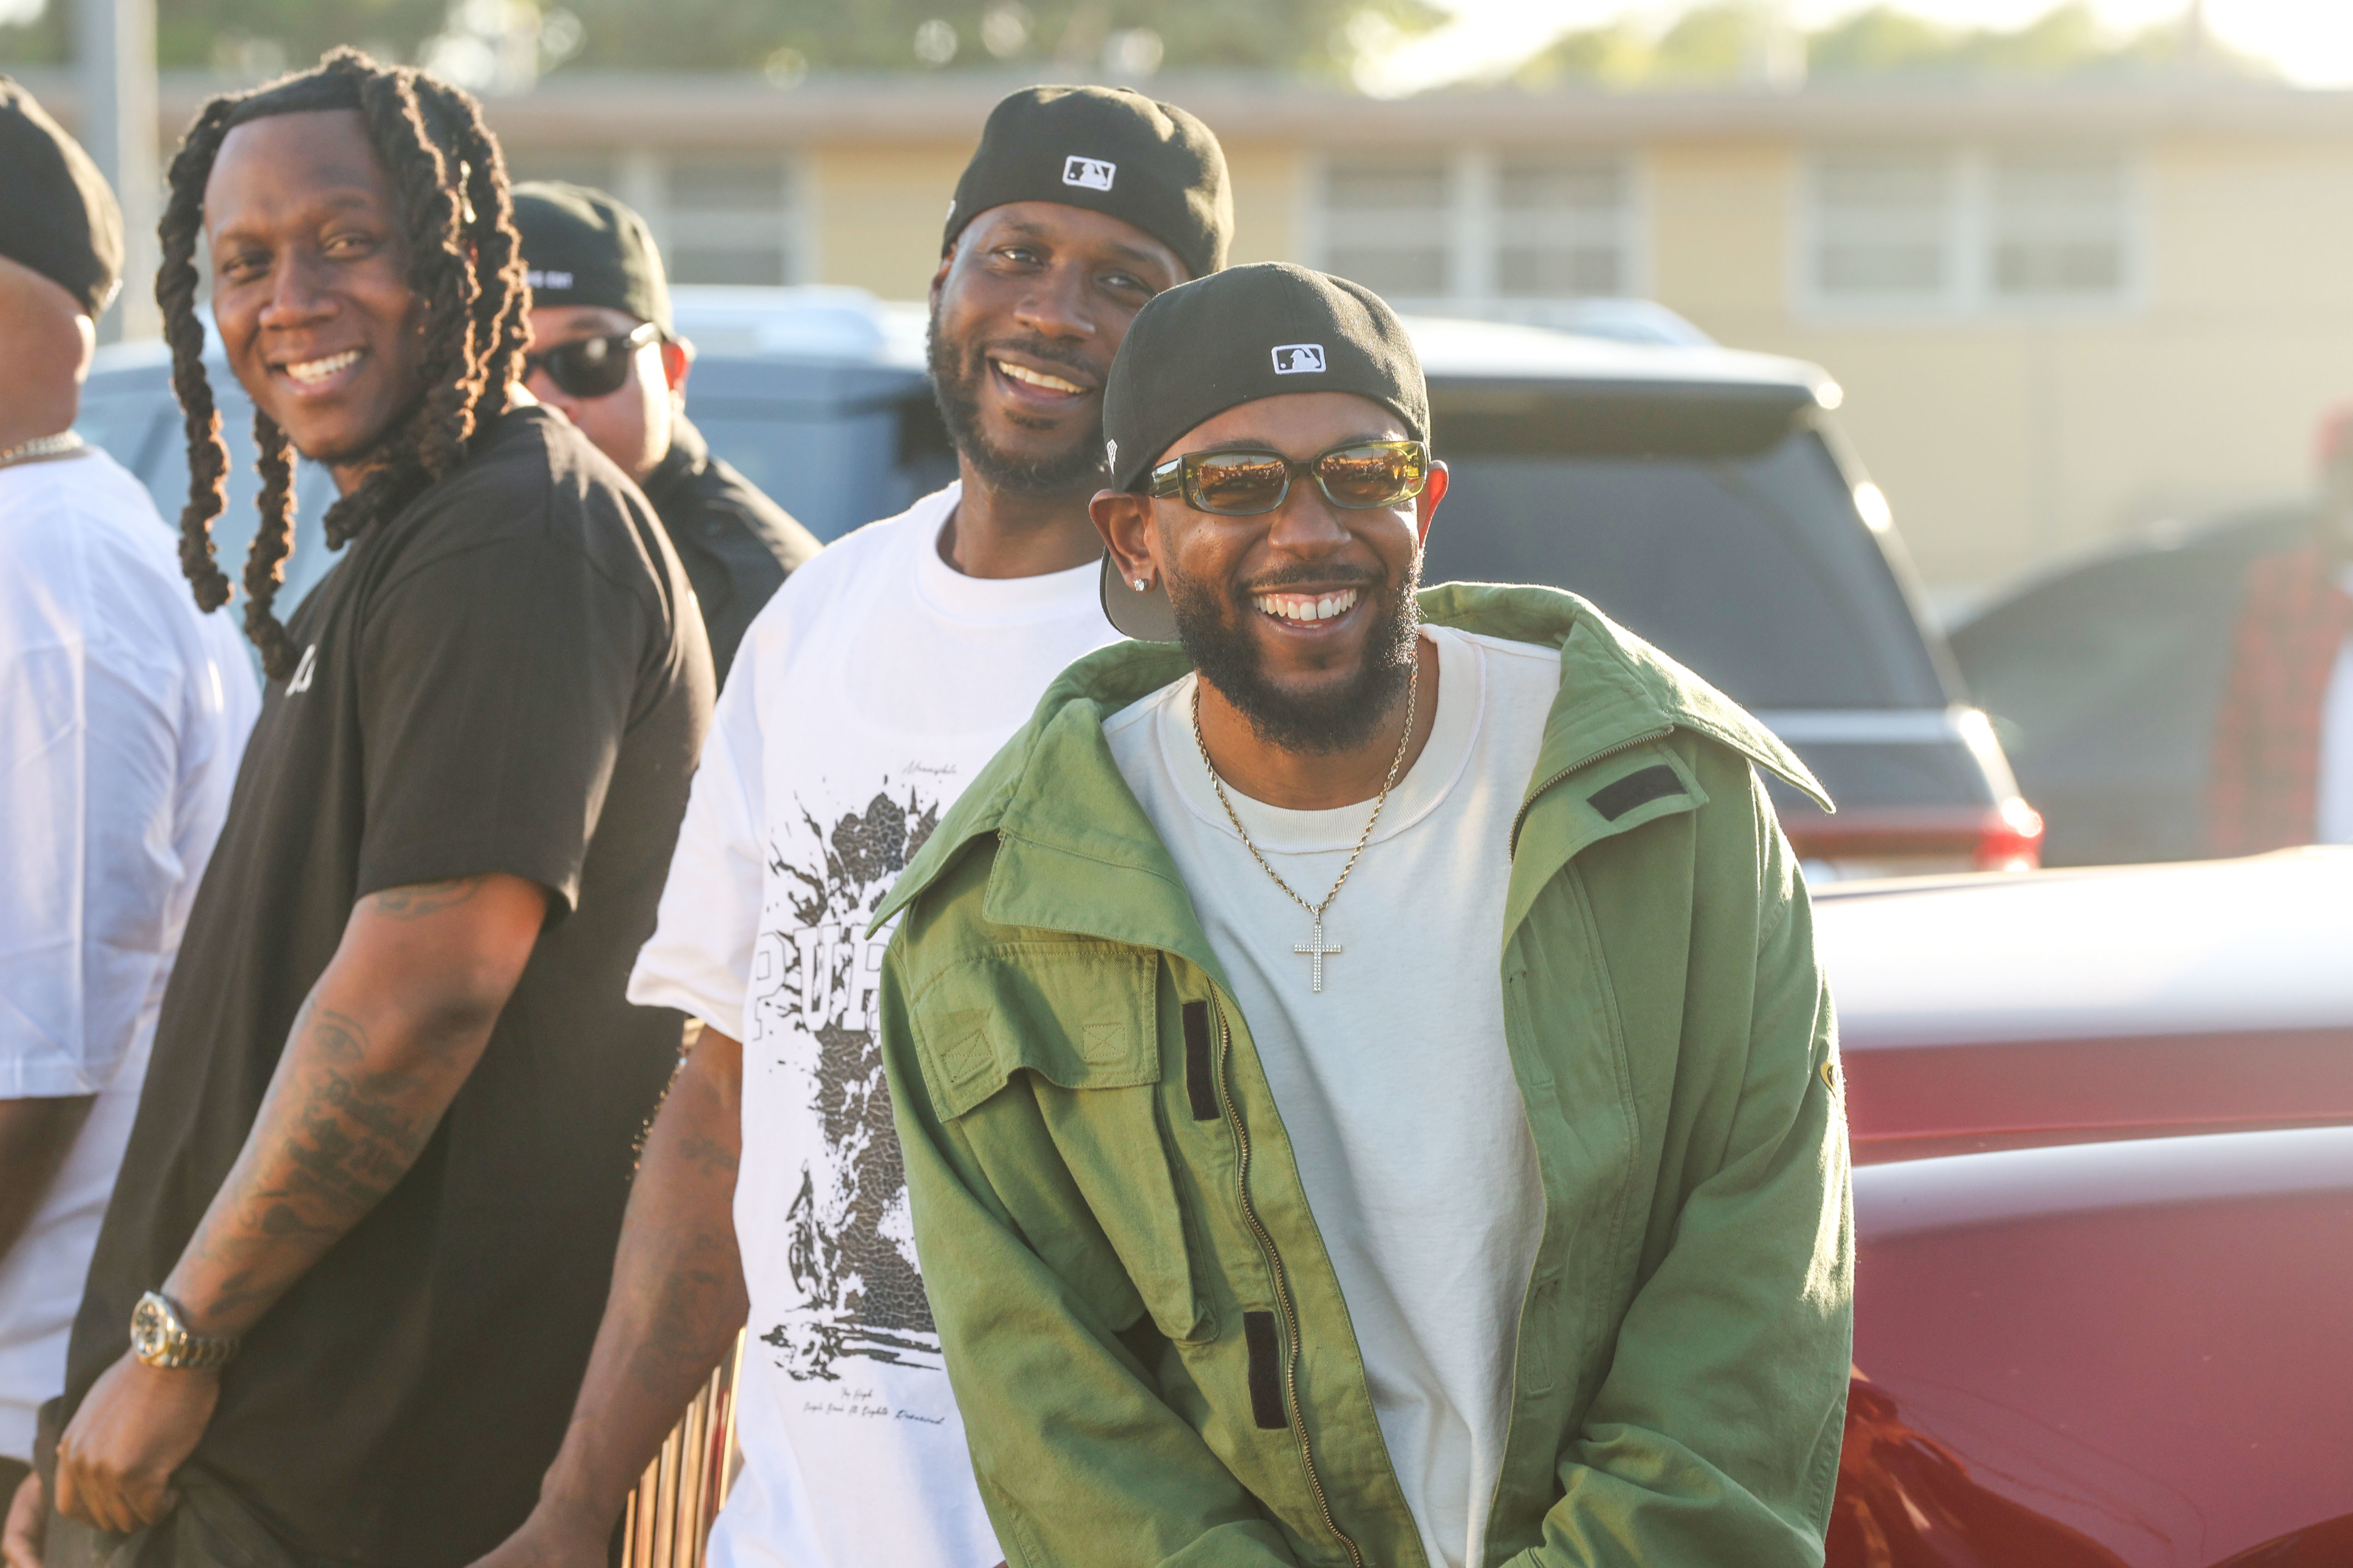 Three men, including Pusha T, smile and pose casually outdoors, wearing casual clothing and hats, in a cheerful and relaxed setting